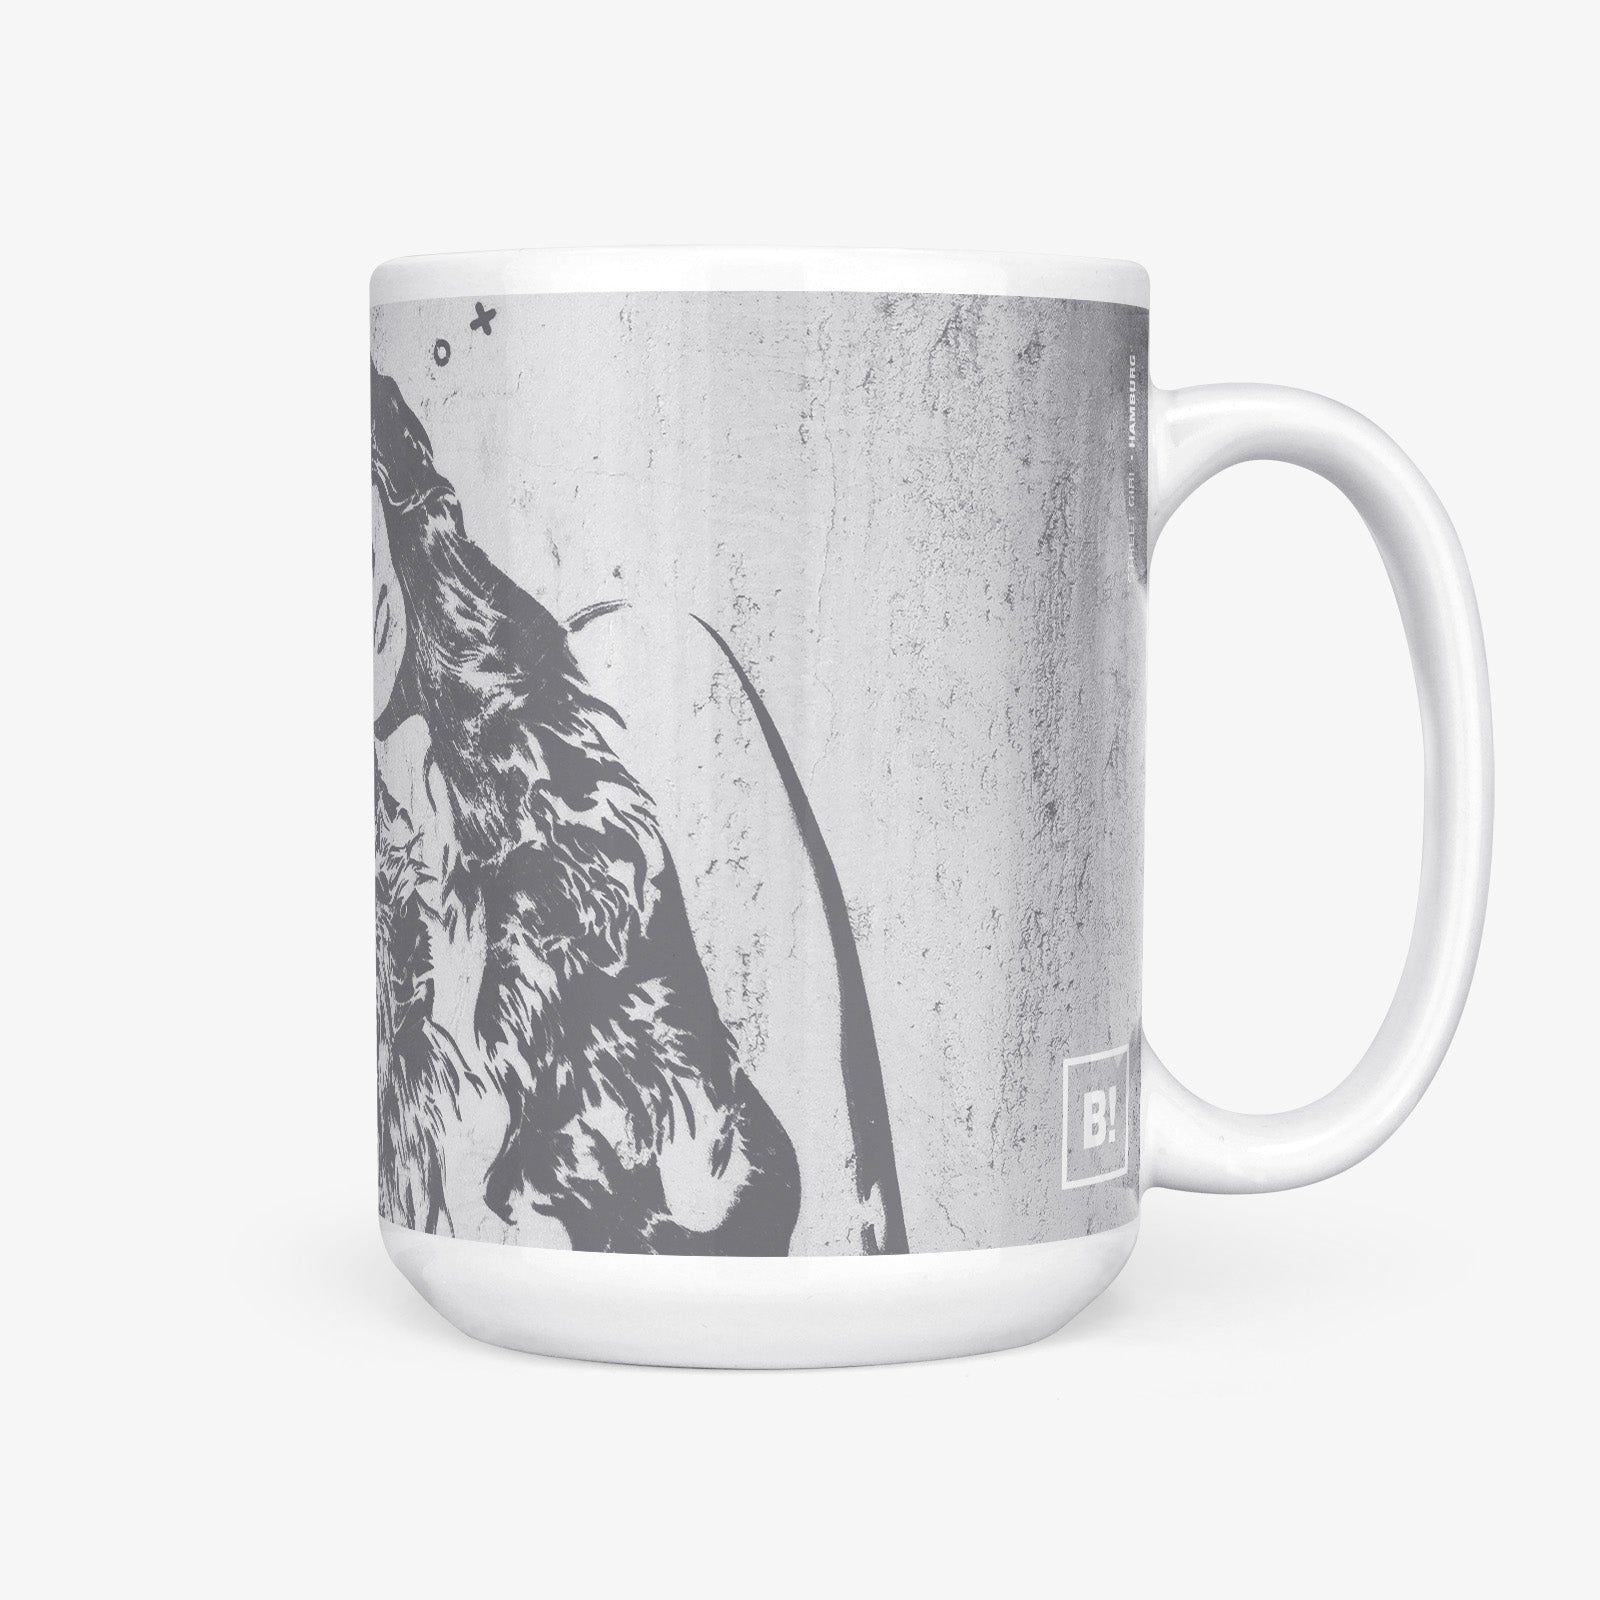 Be inspired by our Urban Art Coffee Mug "Street Girl" from Hamburg. This mug features an 15oz size with the handle on the right.